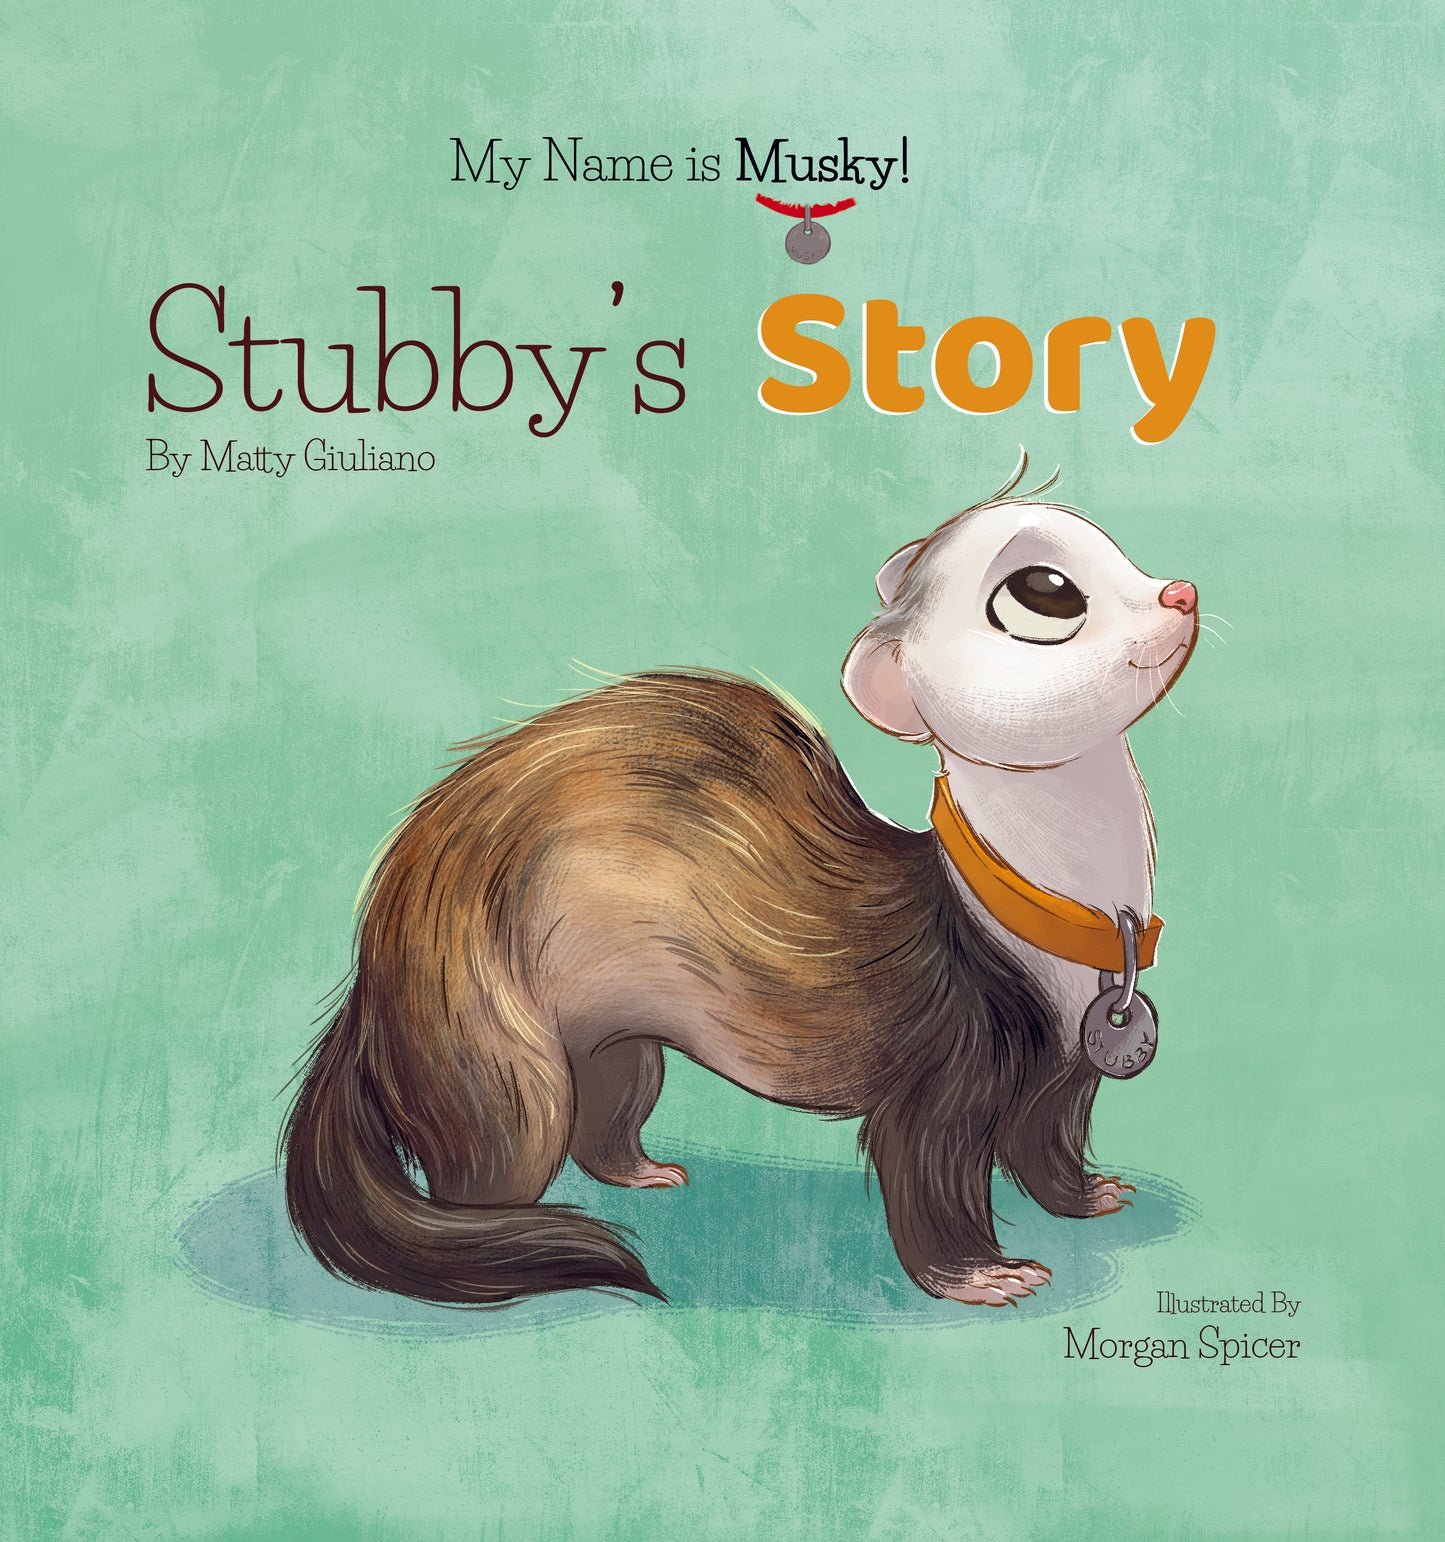 "My Name is Musky! Stubby's Story" Pawtographed Children's Book!